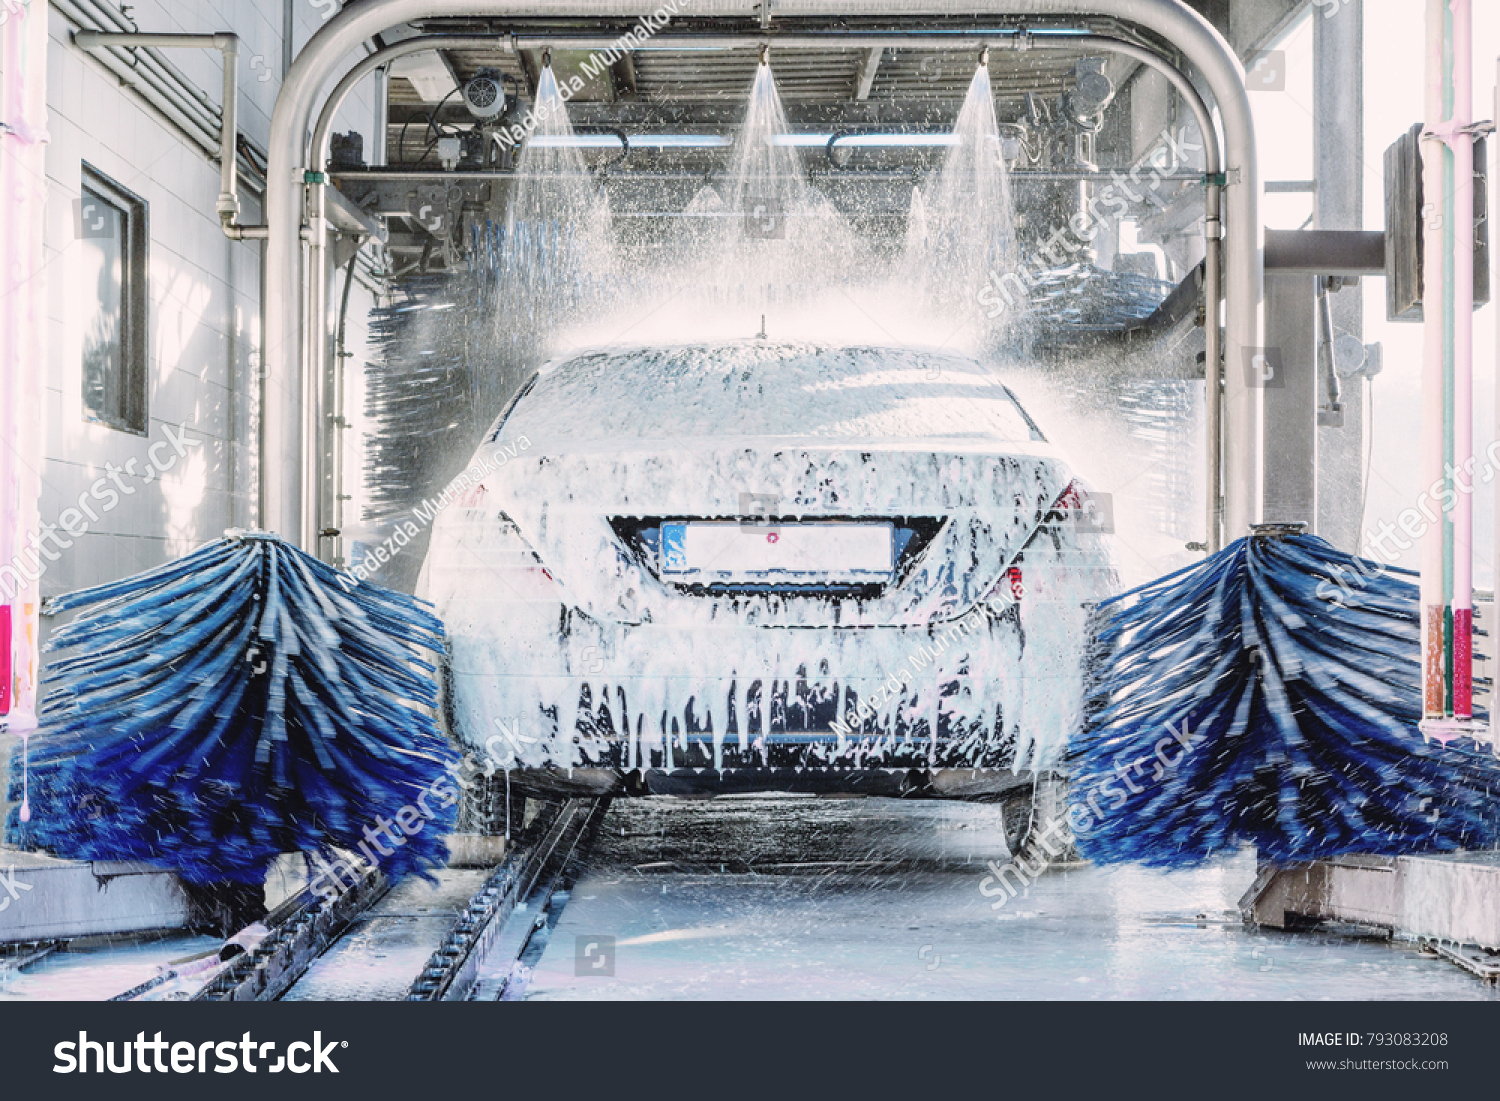 detail view on car wash, car wash foam water, Automatic car wash in action #793083208